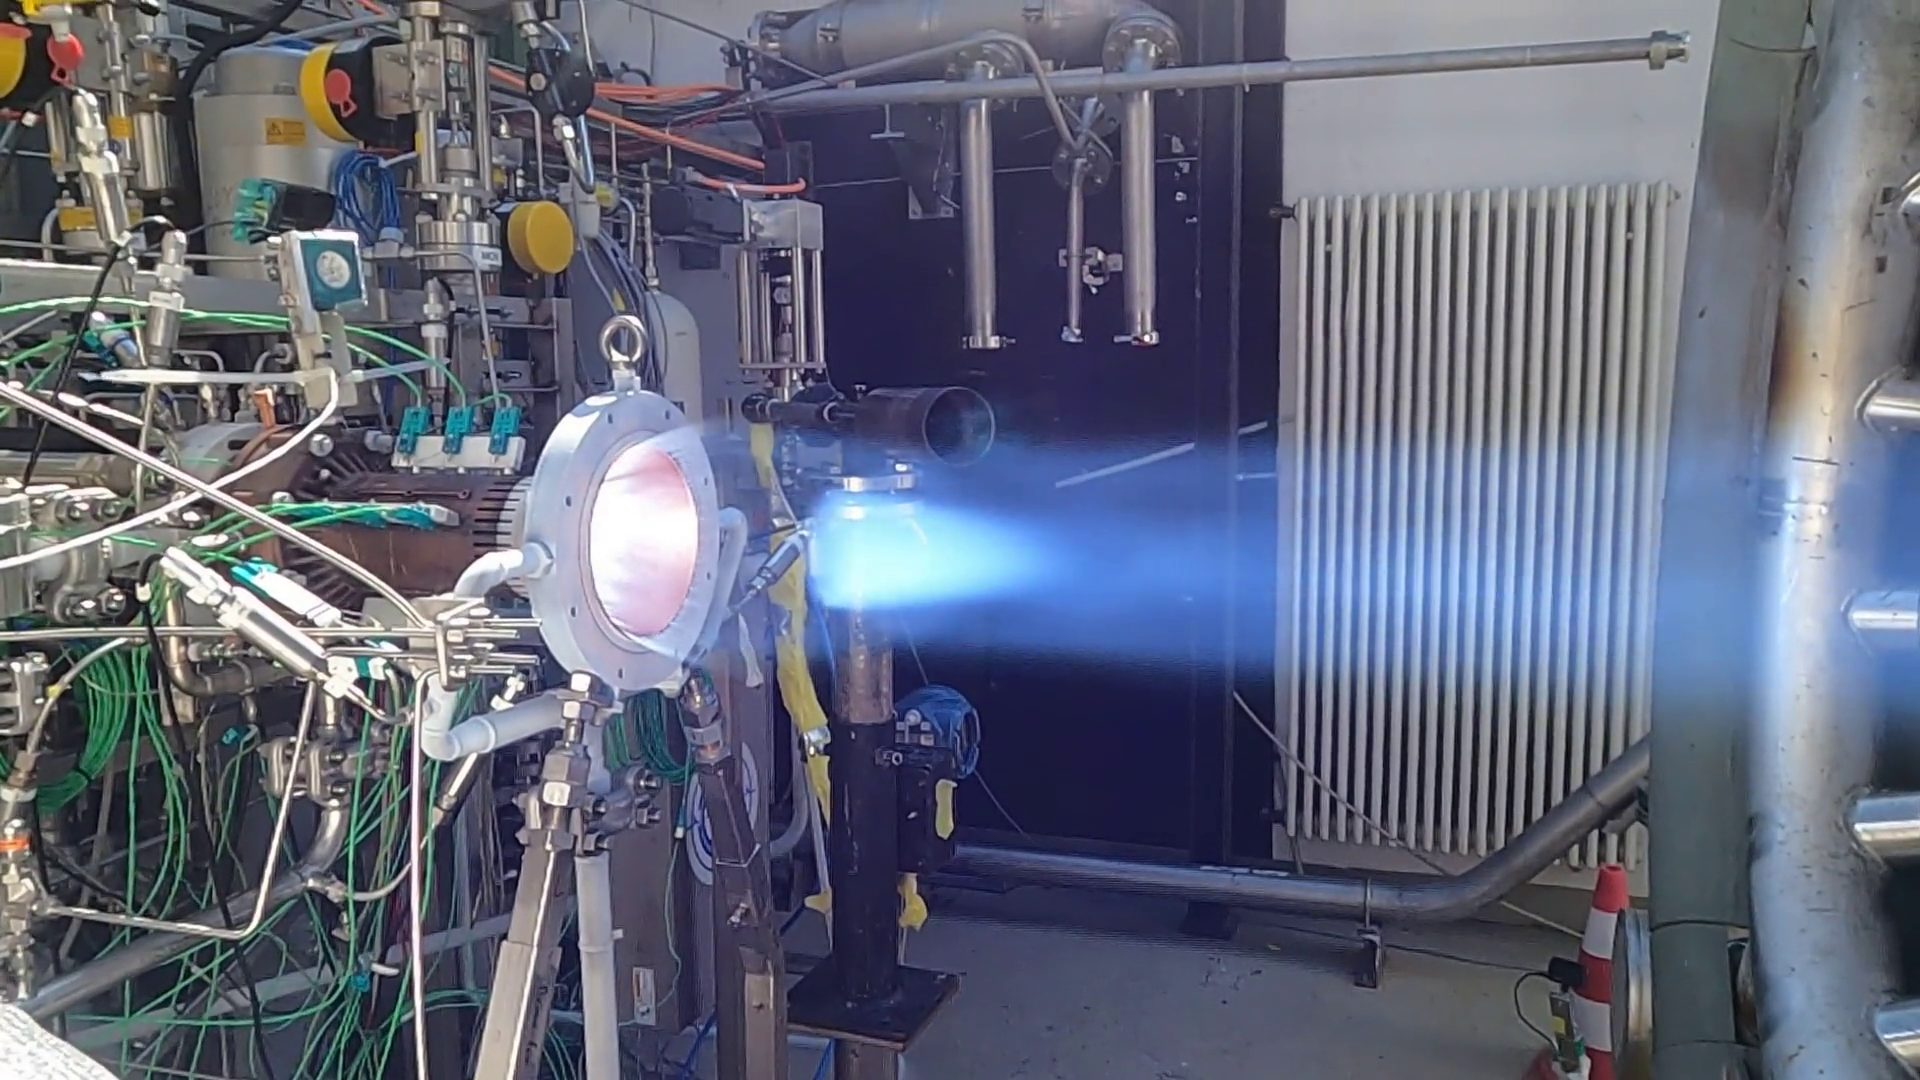 Testing the 3D-printed combustion chamber on the P8 test stand at DLR in Lampoldshausen